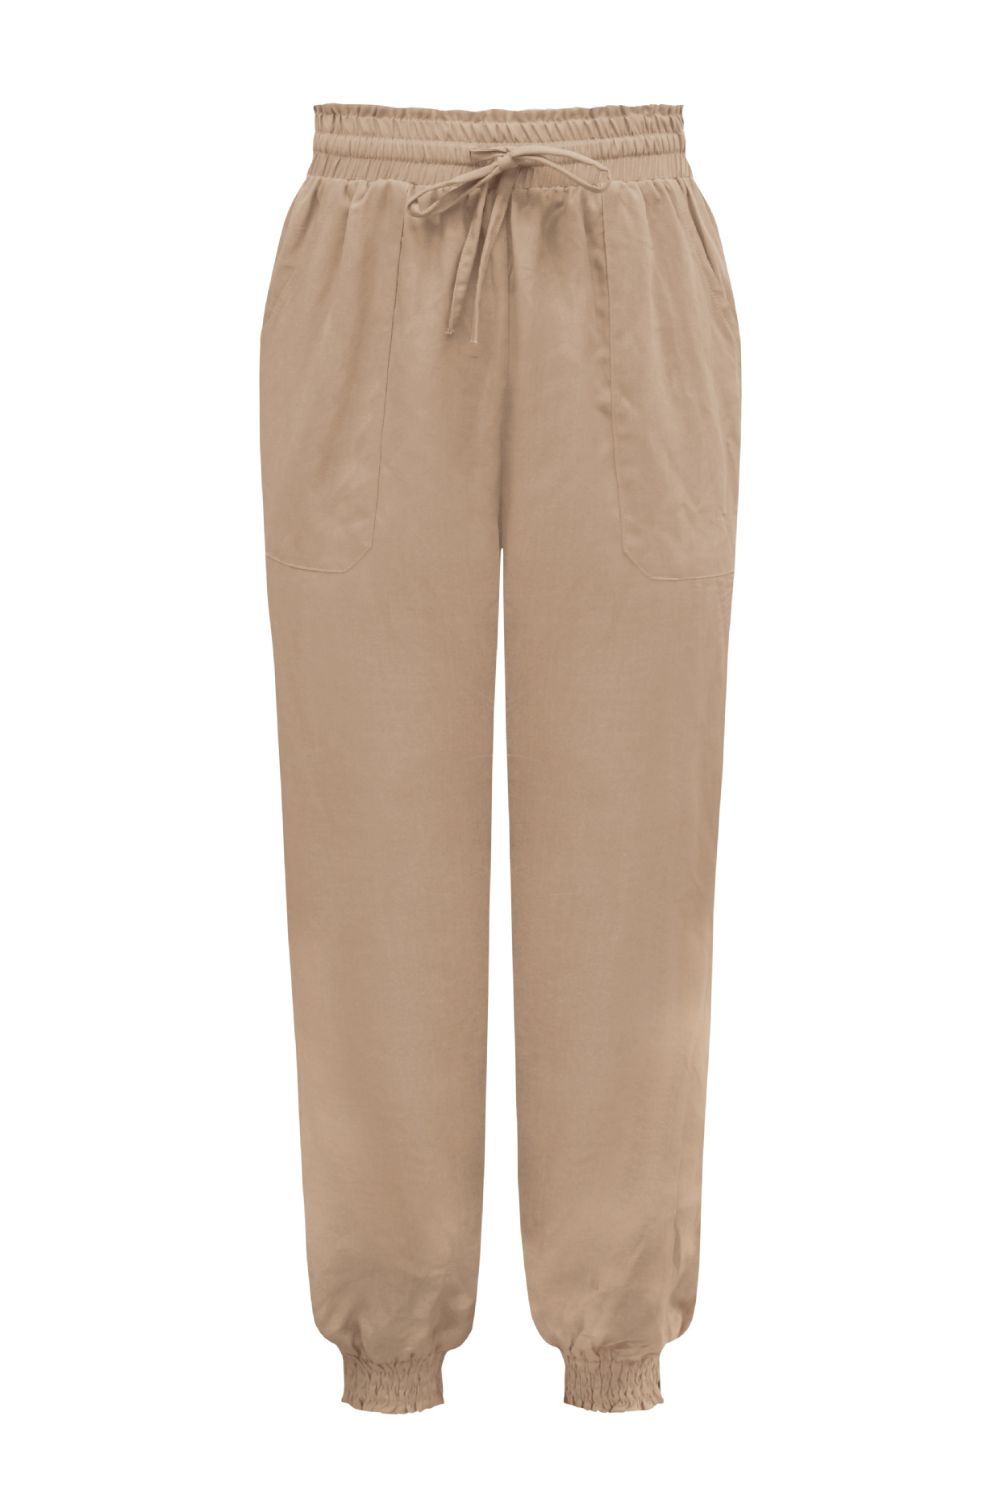 TAN - Tied Long Joggers with Pockets - 5 colors - womens joggers at TFC&H Co.